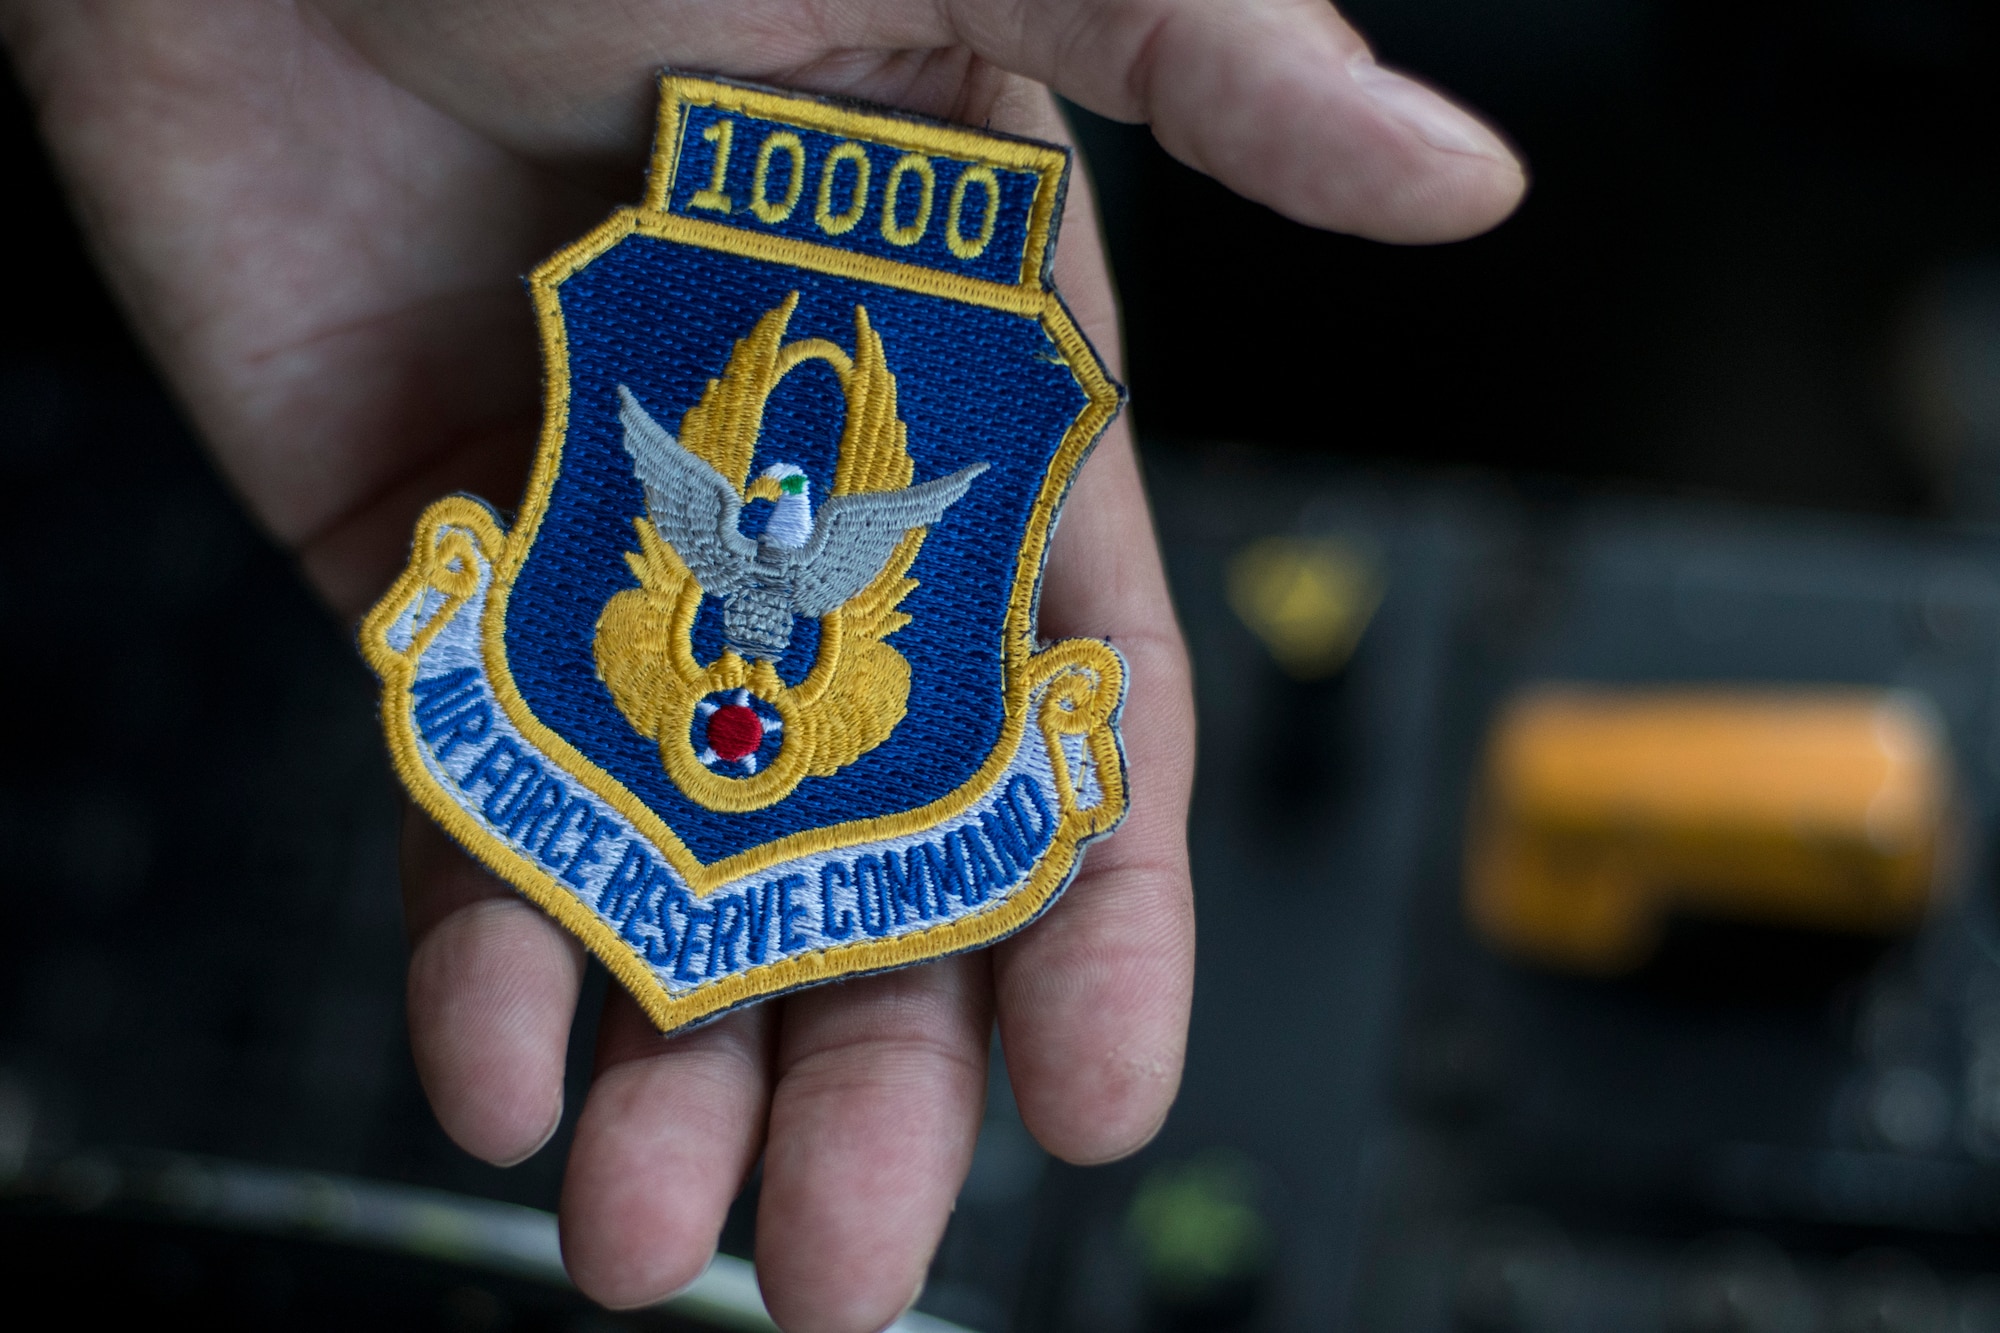 Chief Master Sgt. Terry Studstill, 700th Airlift Squadron flight engineer superintendent, shows a patch displaying 10,000 hours shortly before taking off on a flight from Dobbins Air Reserve Base, Ga. on Nov. 25, 2019. During the flight, he reached 10,000 hours, a major milestone in an aviator's career. (U.S. Air Force photo/Tech. Sgt. Andrew Park)